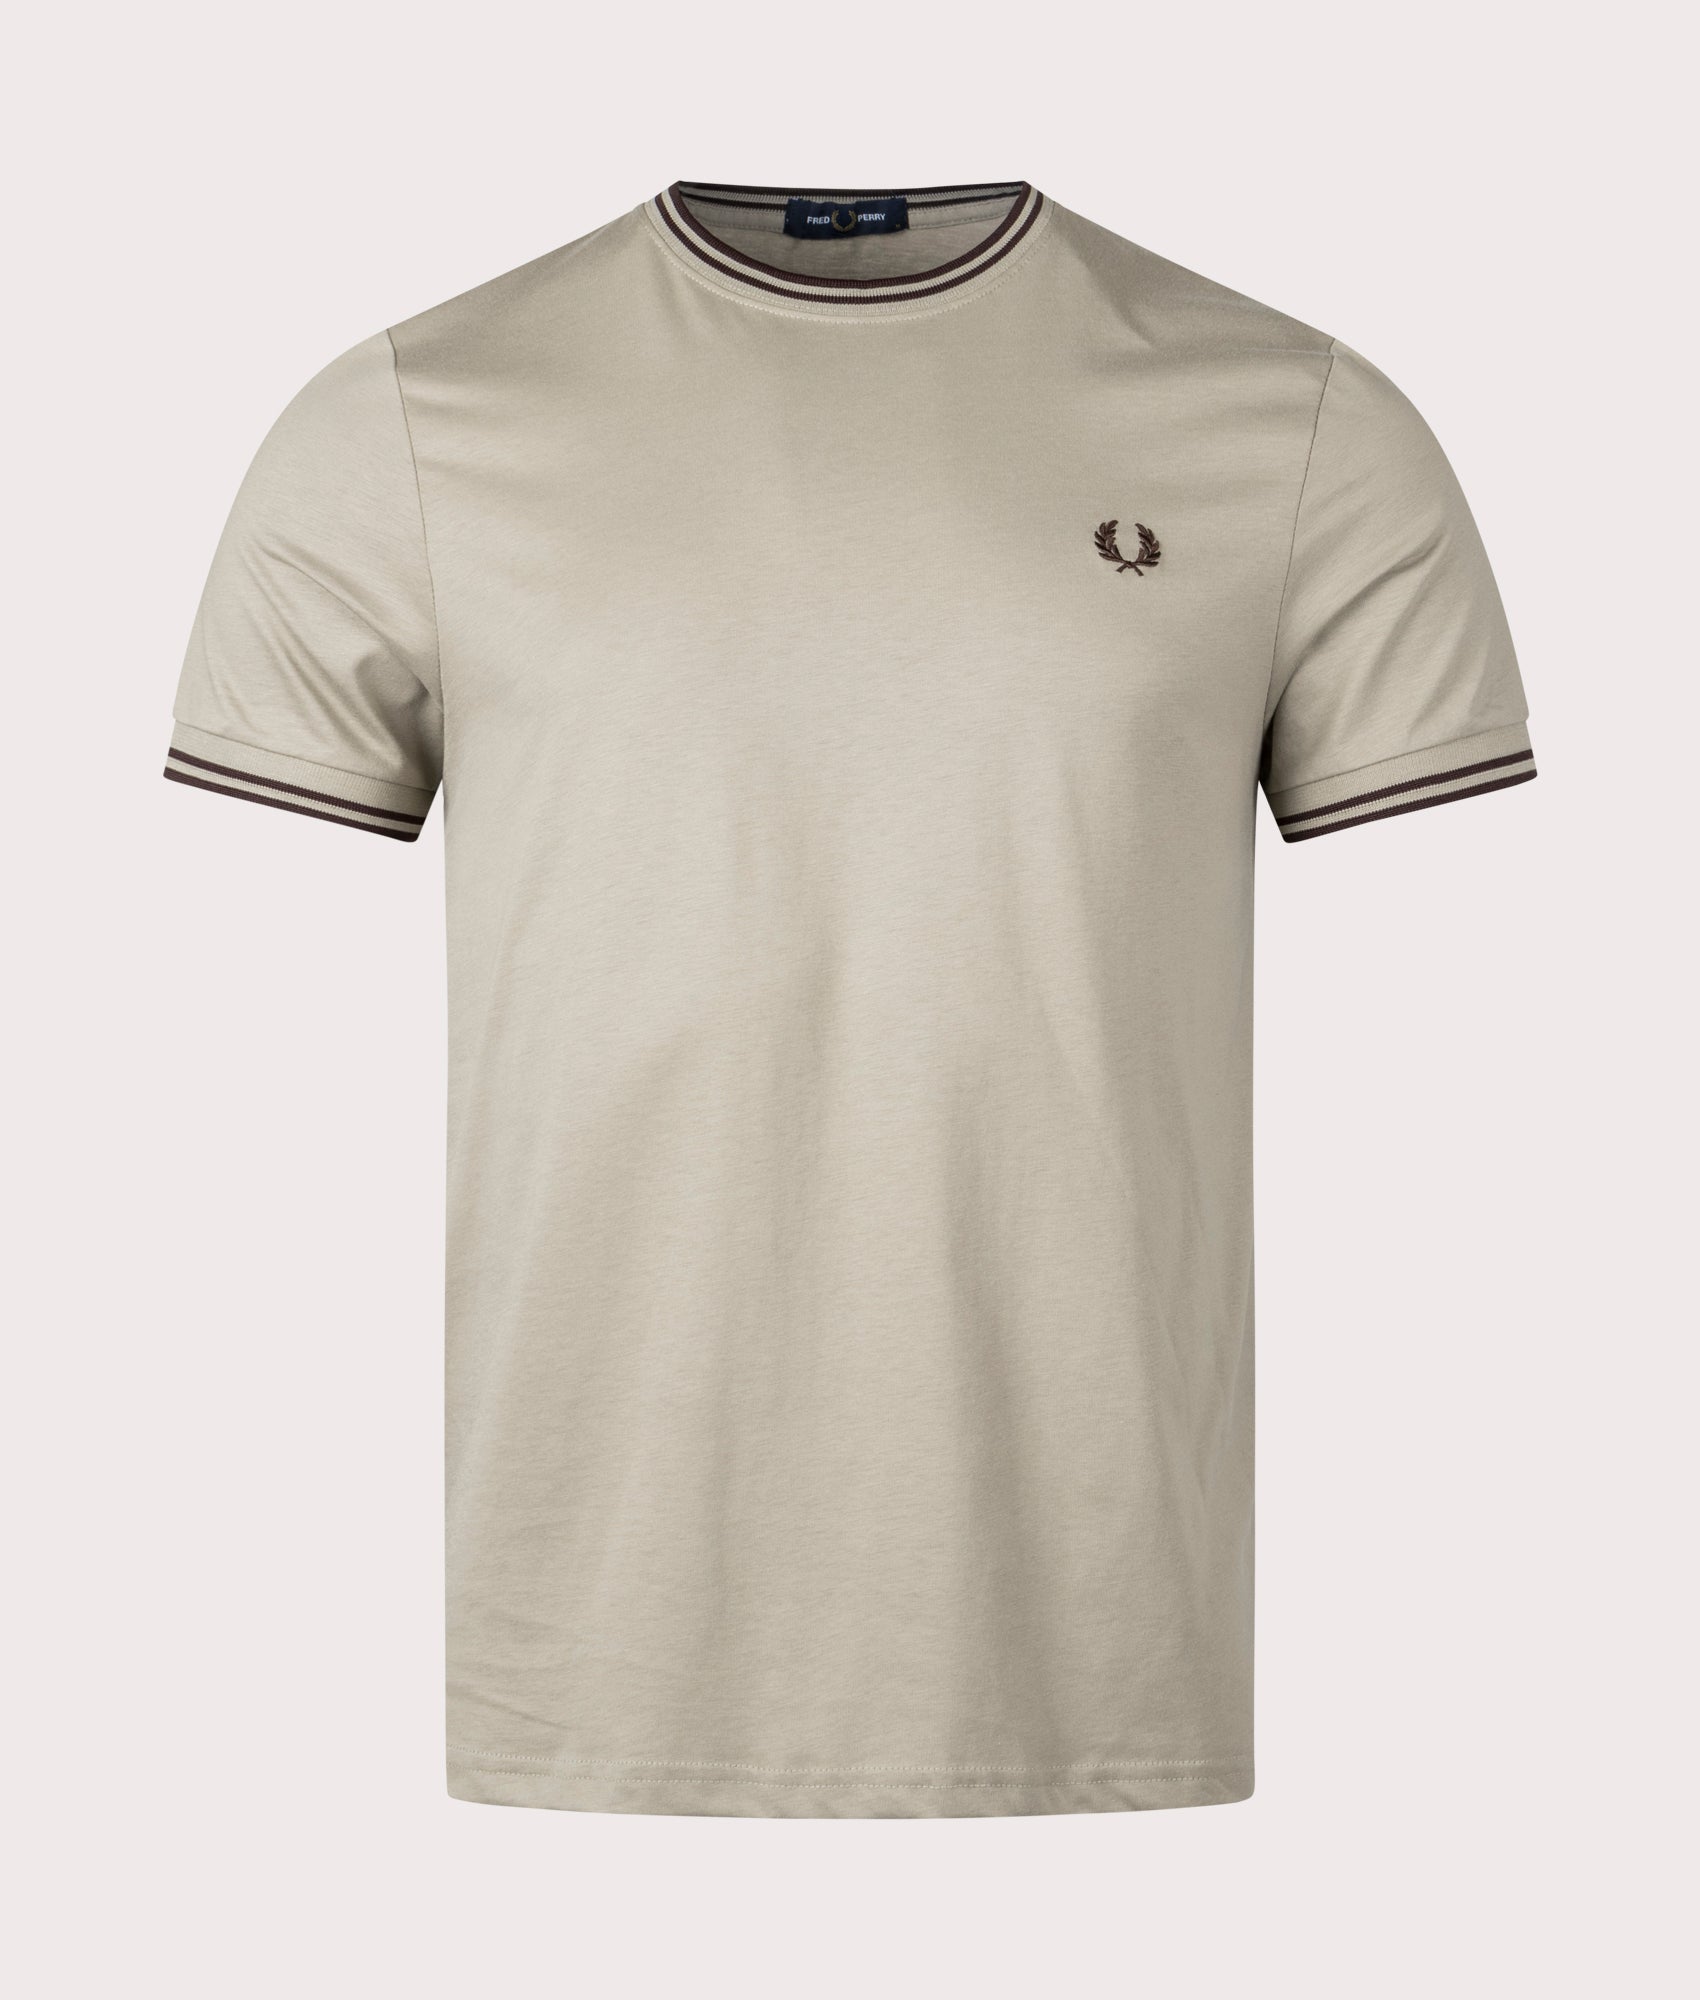 Fred Perry Mens Twin Tipped T-Shirt - Colour: U84 Warm Grey/Carrington Road Brick - Size: Large